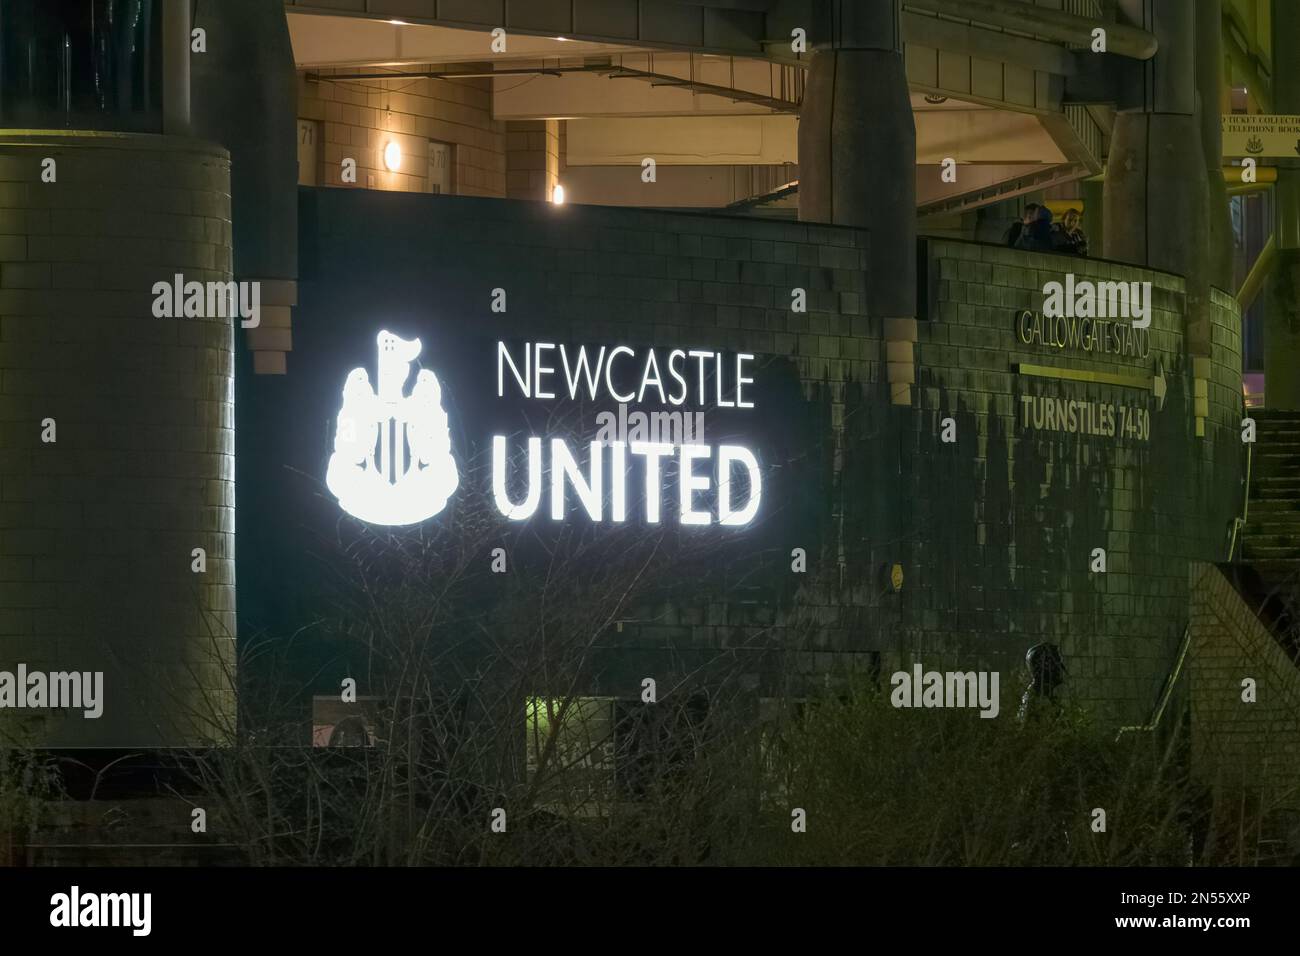 Exterior view of the Newcastle United football stadium St James' Park, ahead of a night soccer match in the city of Newcastle upon Tyne. Stock Photo